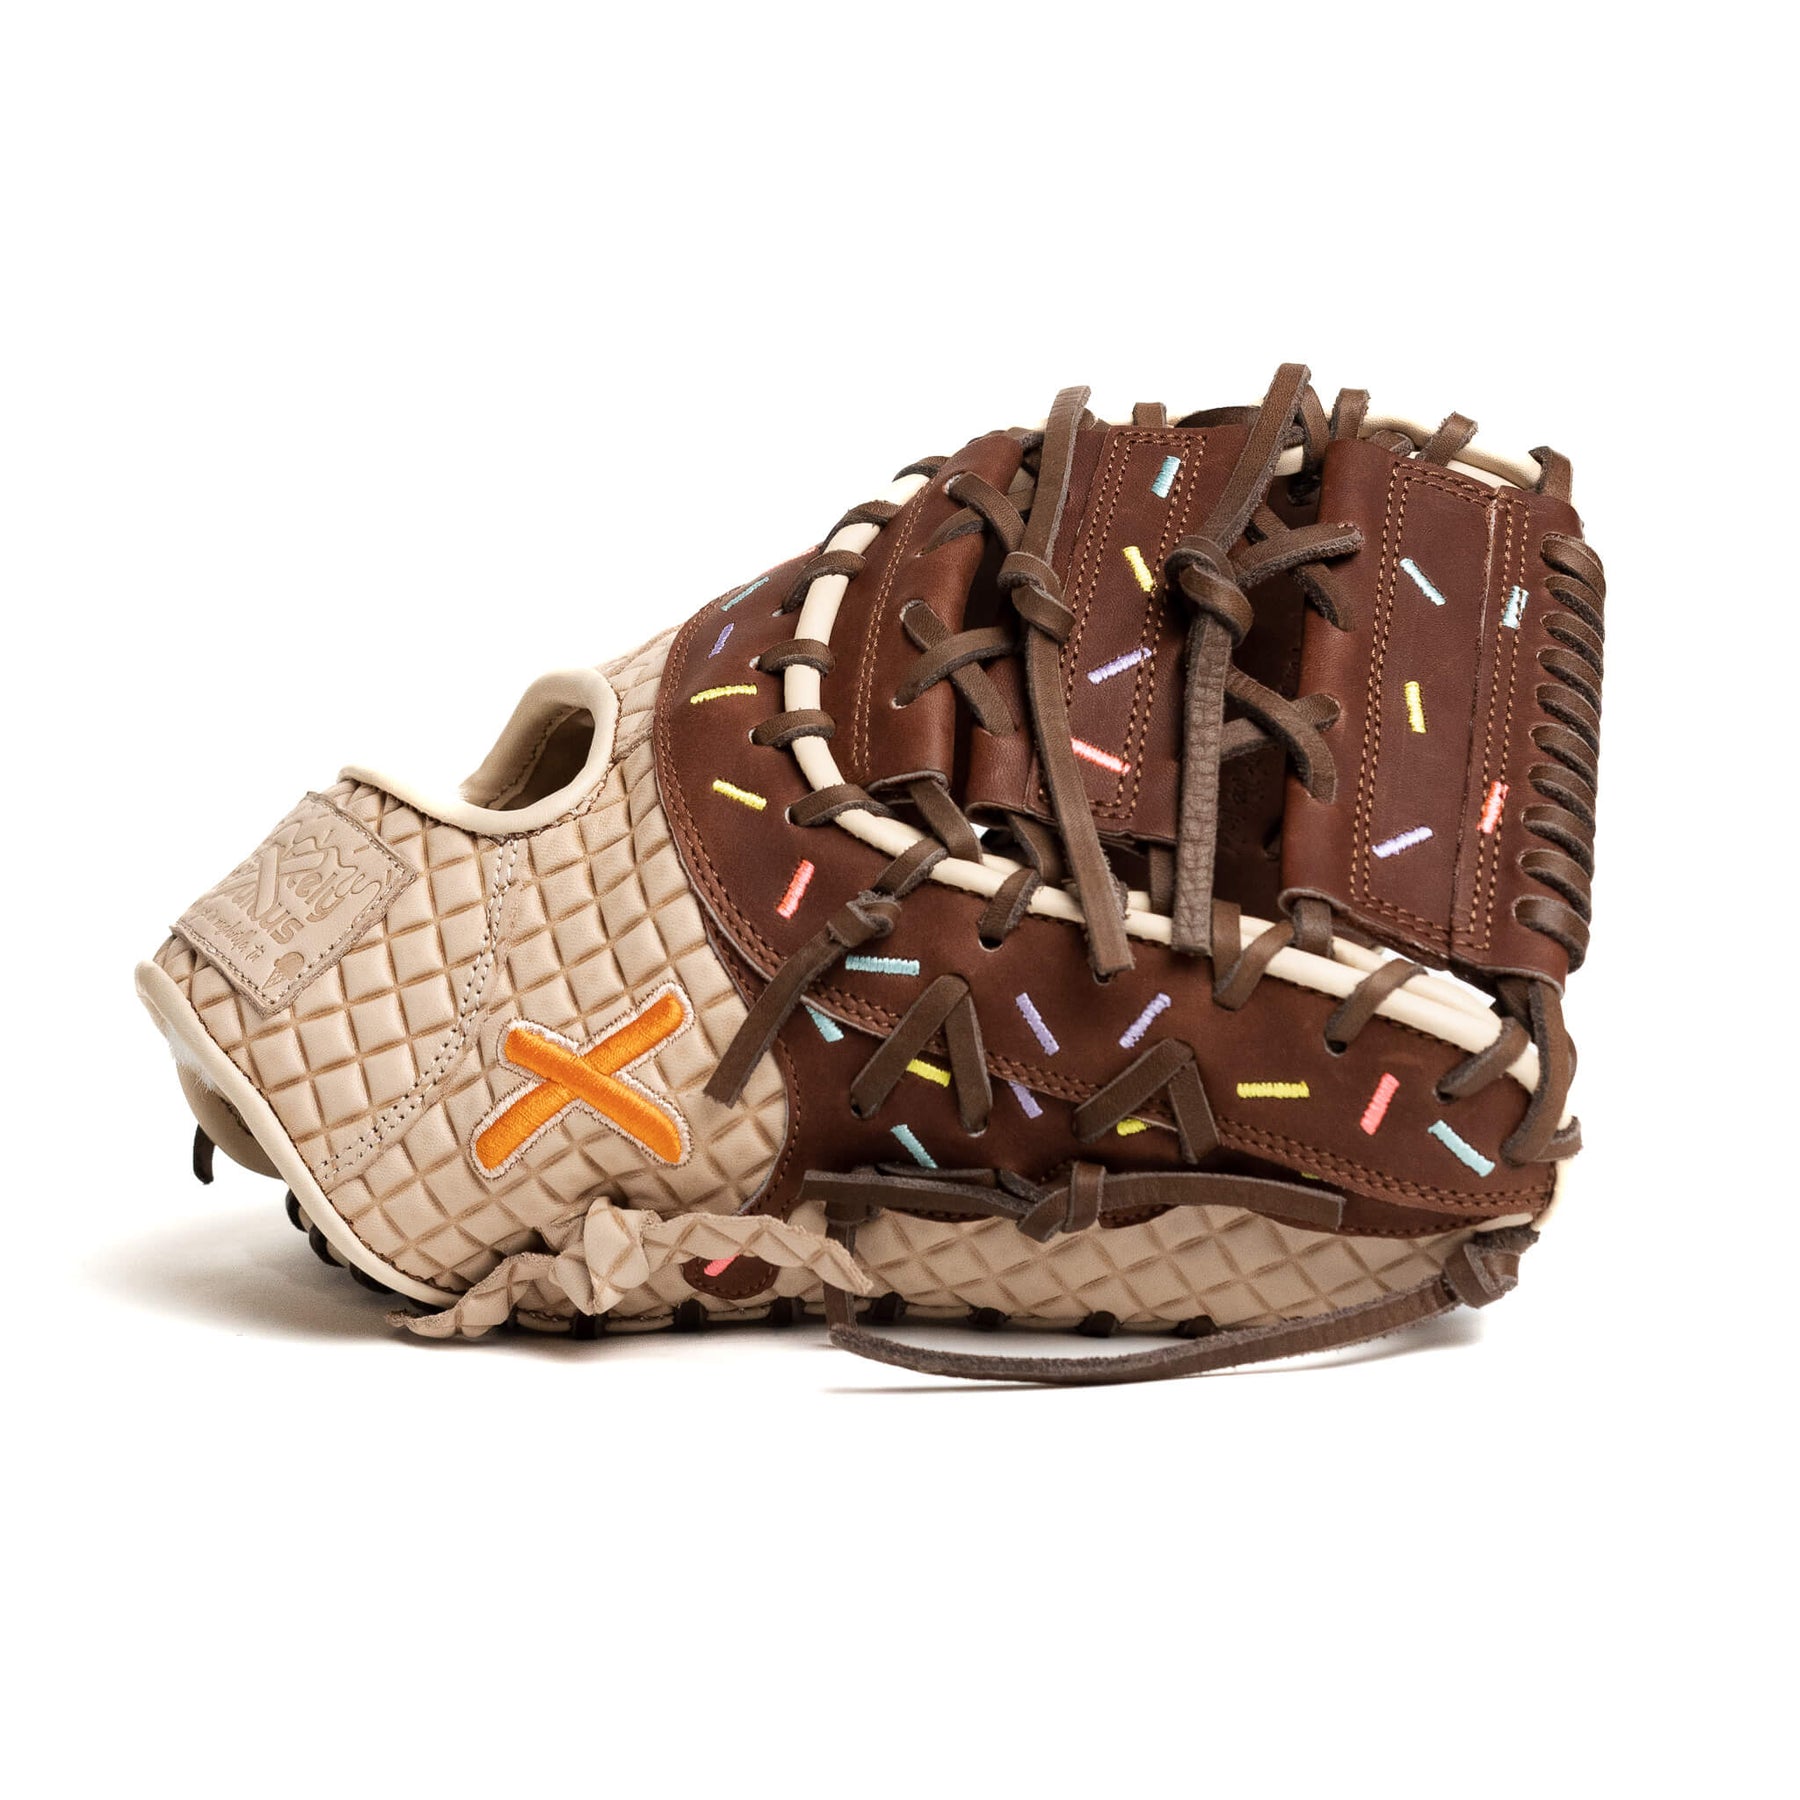 ice cream 1b glove  chocolate – Absolutely Ridiculous innovation for  Athletes